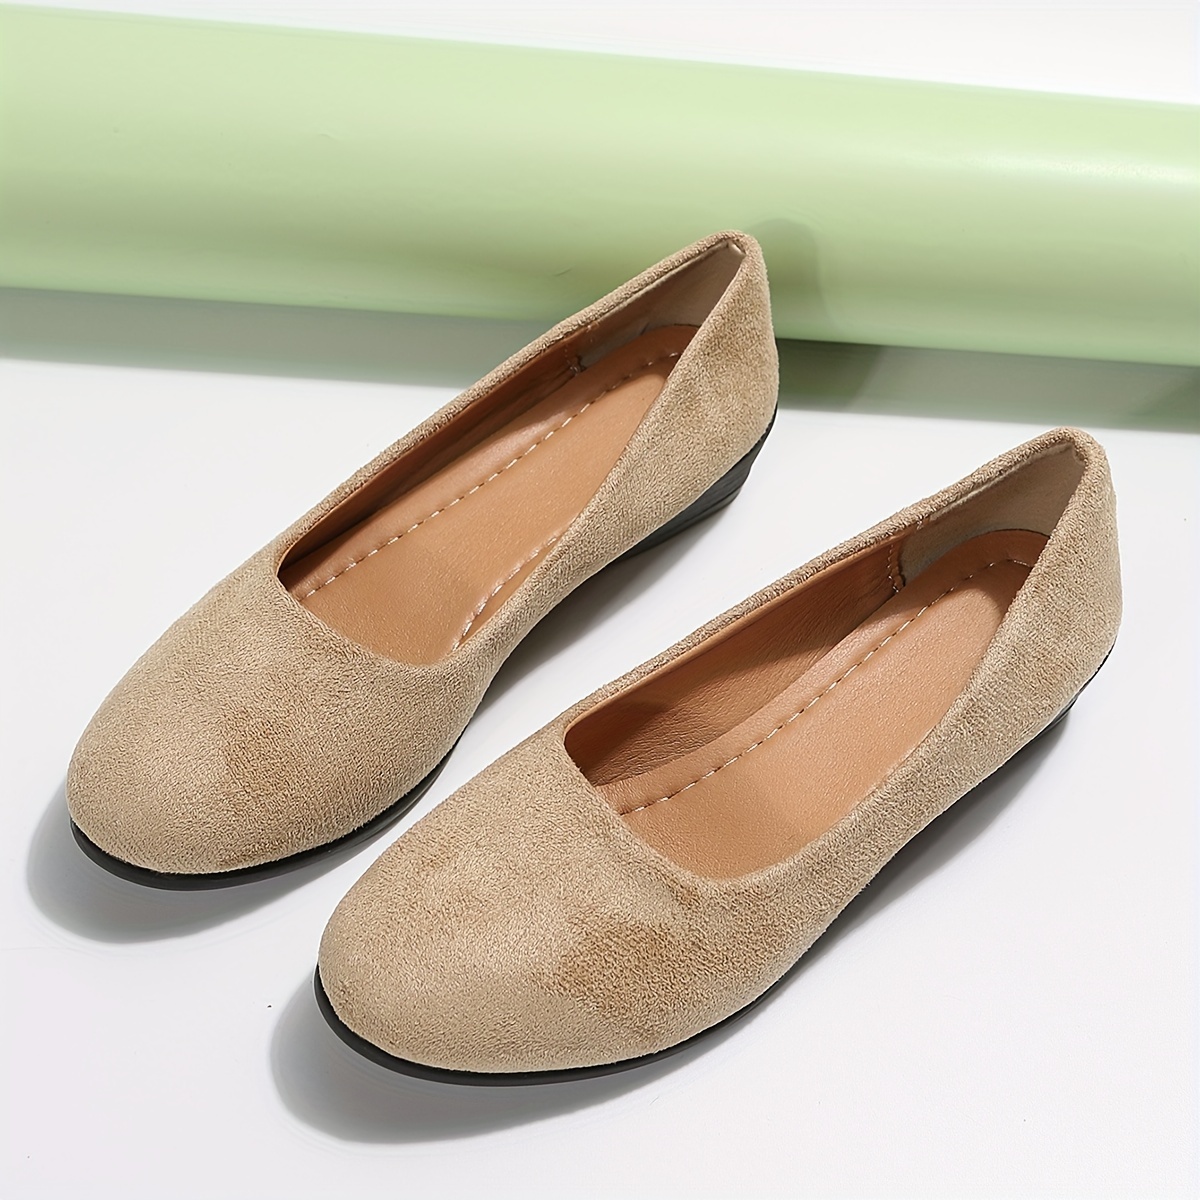 Hoxekle Comfortable Suede Wedge Heel Flat Shoes for Women India